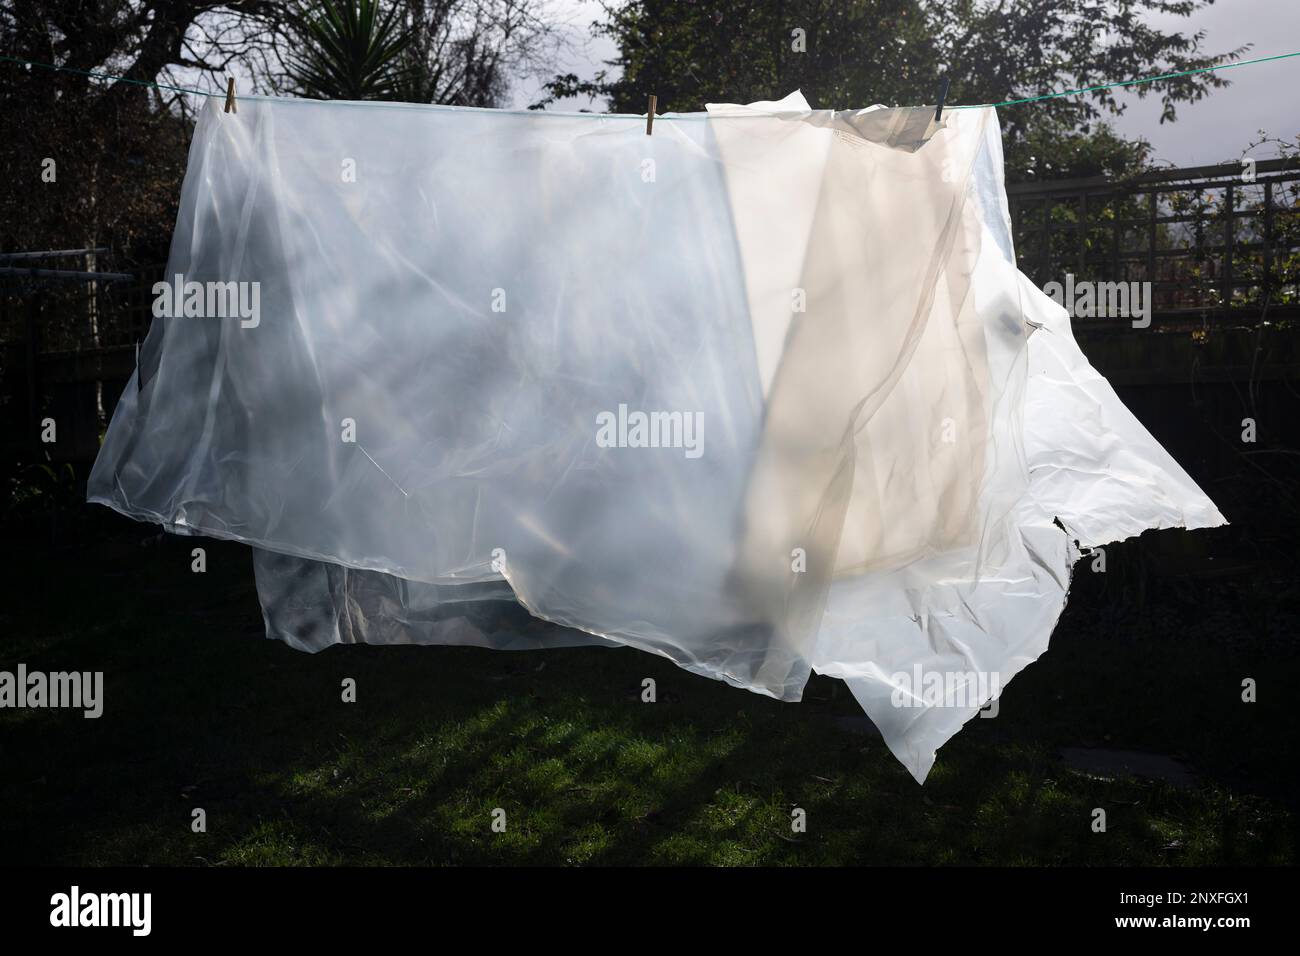 Plastic sheeting that's been pegged to a washing line for airing, has the appearance of an animal or beast of some some description - possibly a lion or other big cat - in a south London back garden, on 25th February 2023, in London, England. Stock Photo